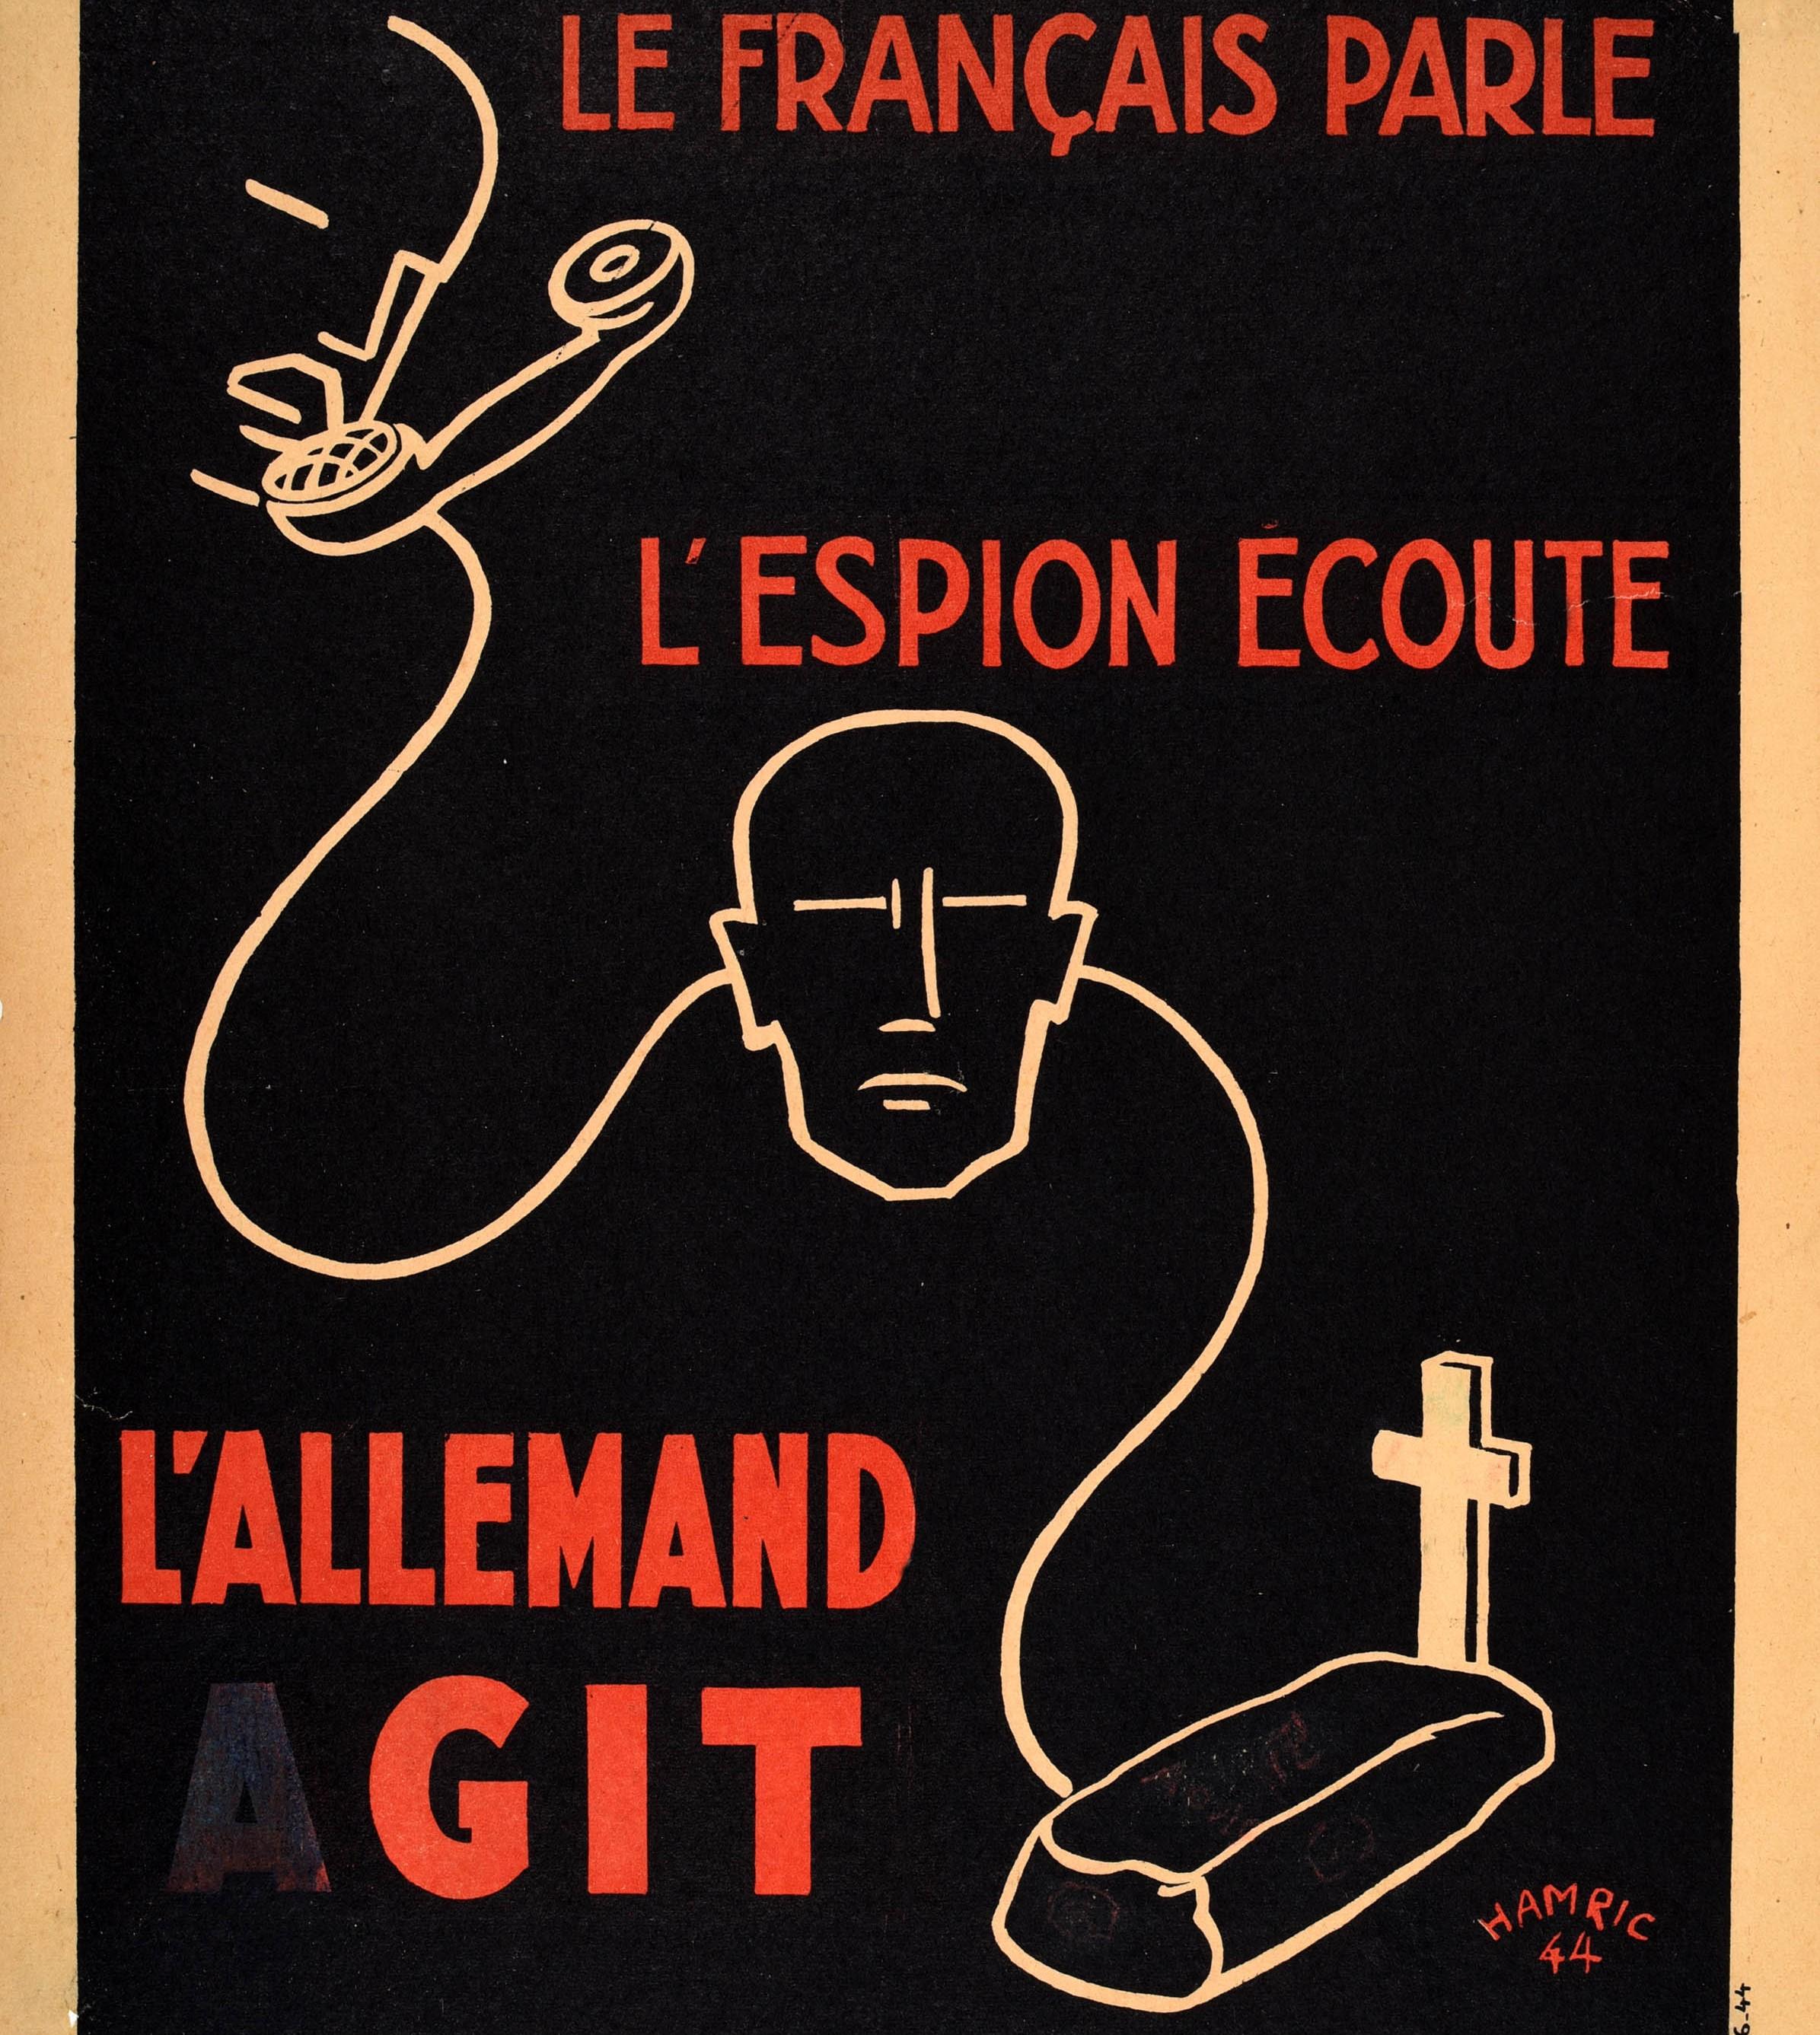 Paper Original Vintage WWII Poster The French Speak The Spy Listens The German Acts For Sale